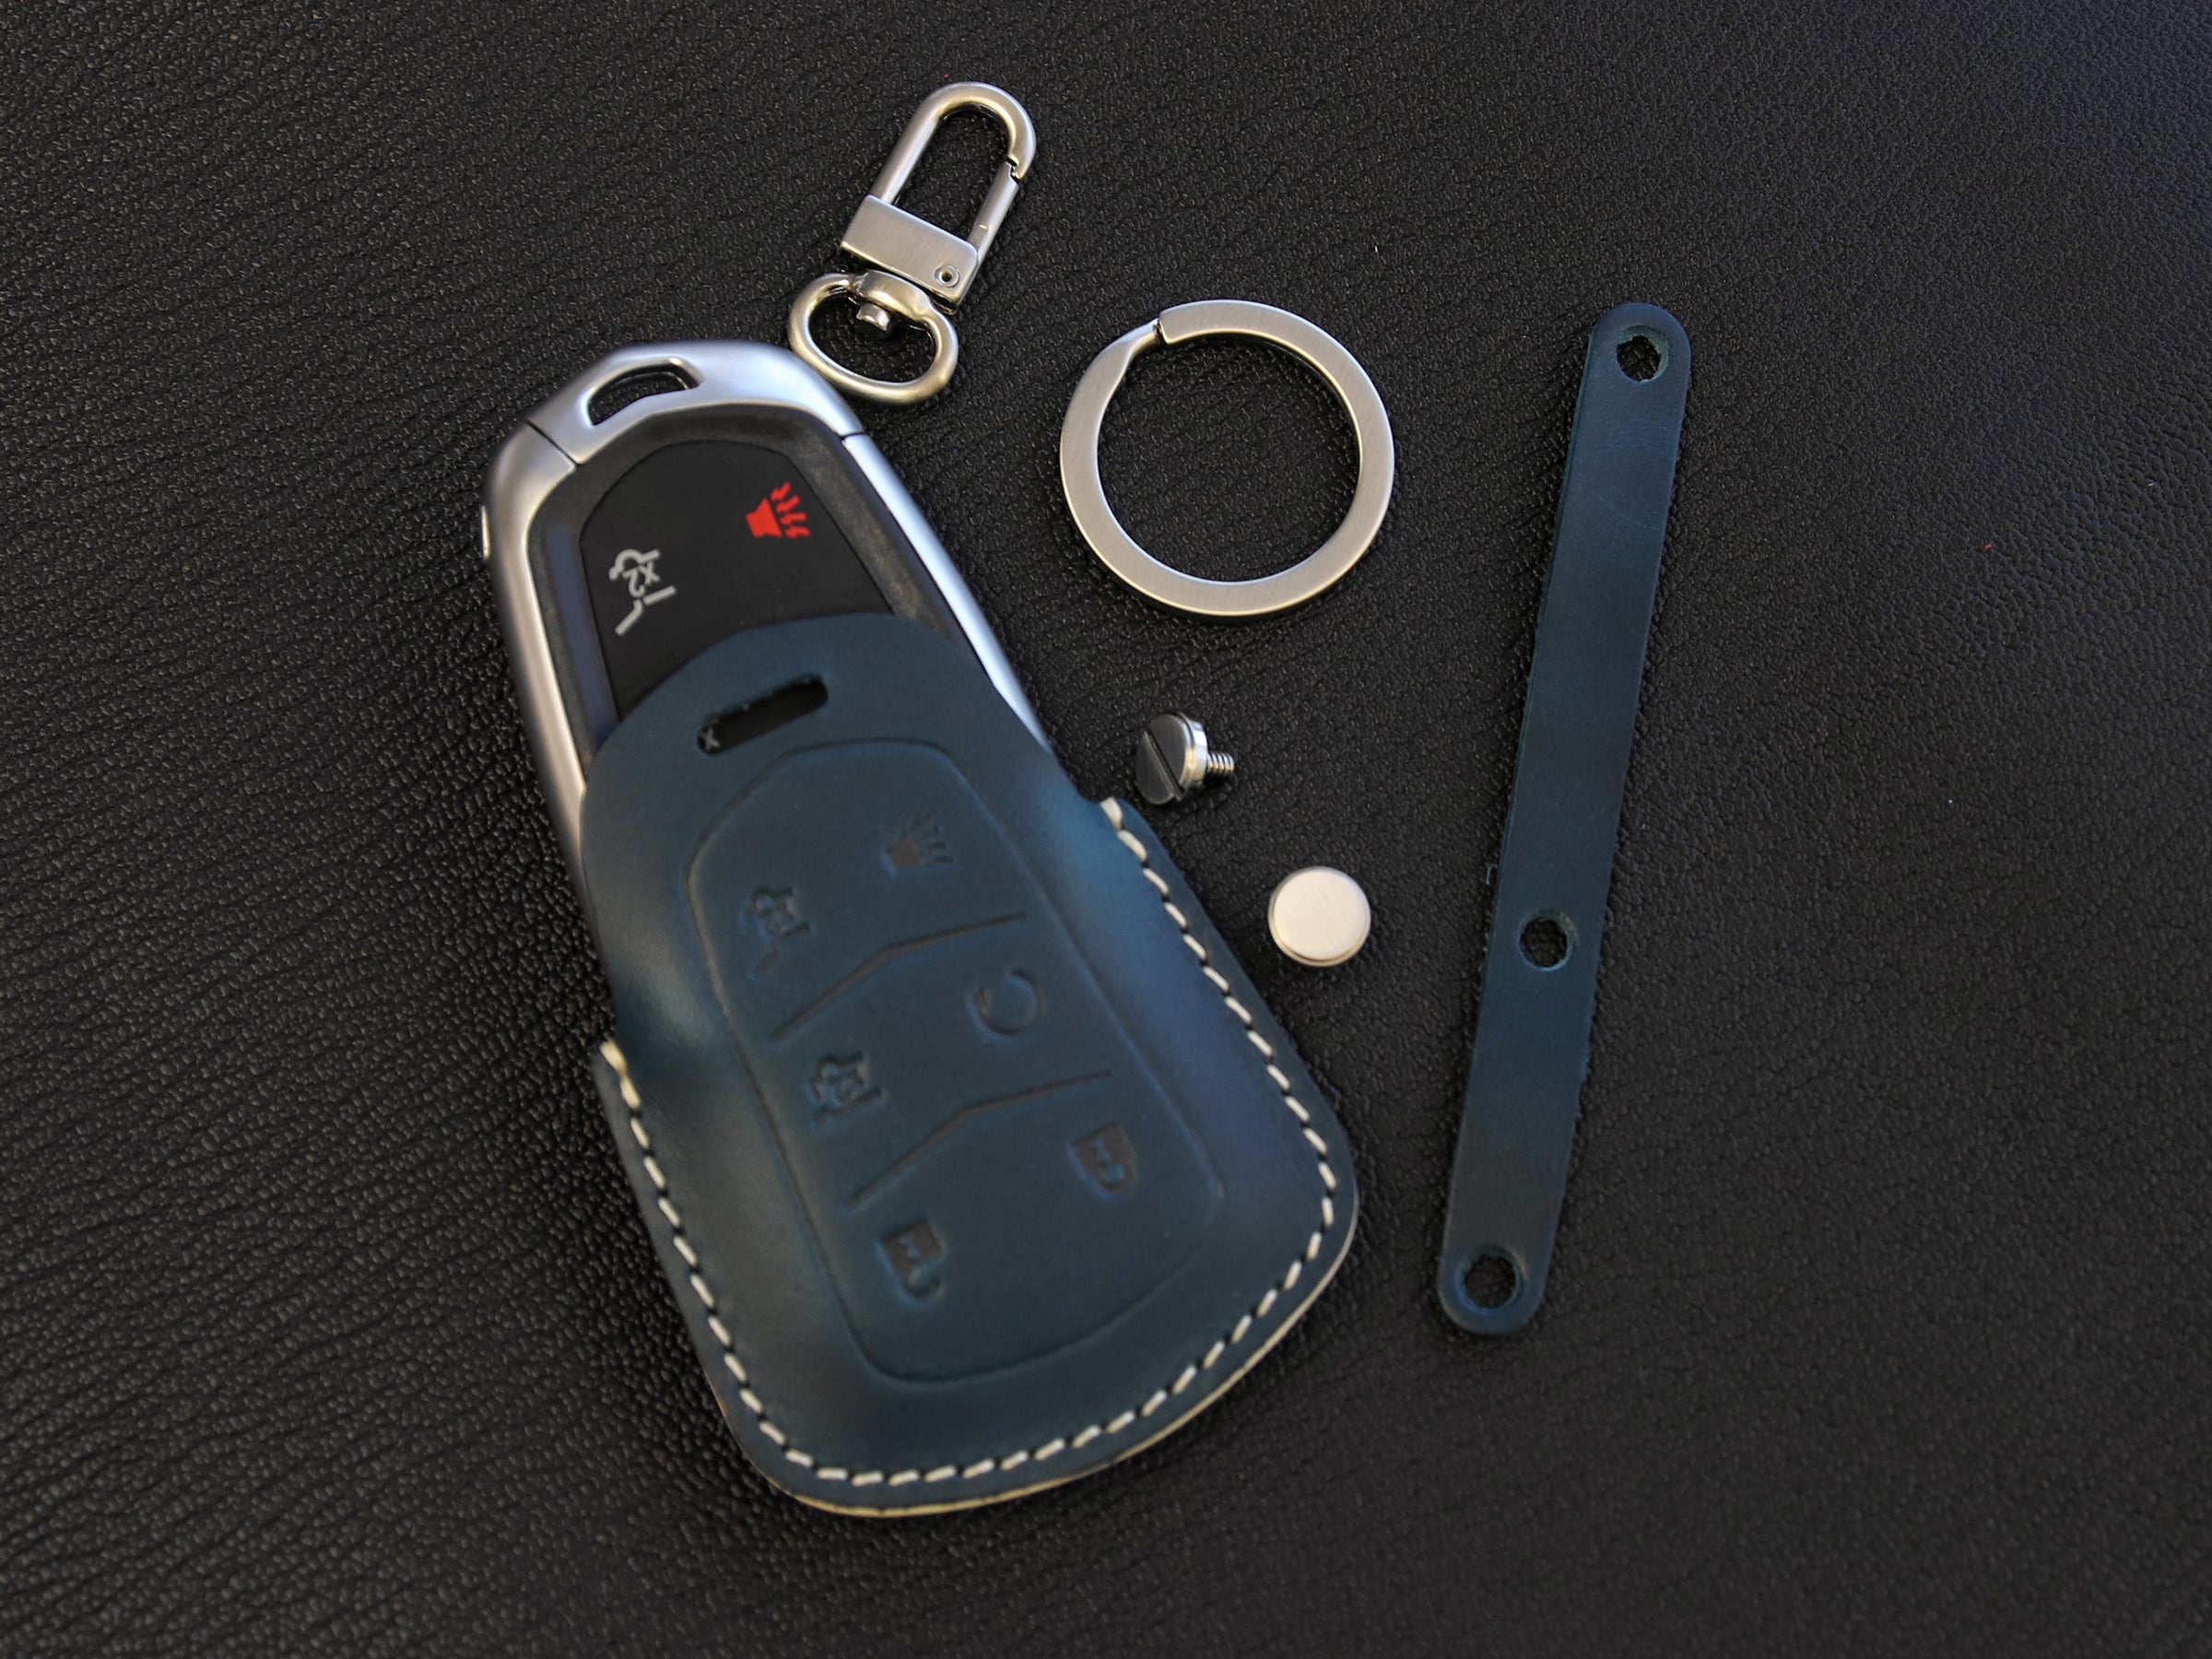 Cadillac [1-6] Key Fob Leather Case Fits Escalade - Italian Veg-Tanned Leather - 6 Buttons